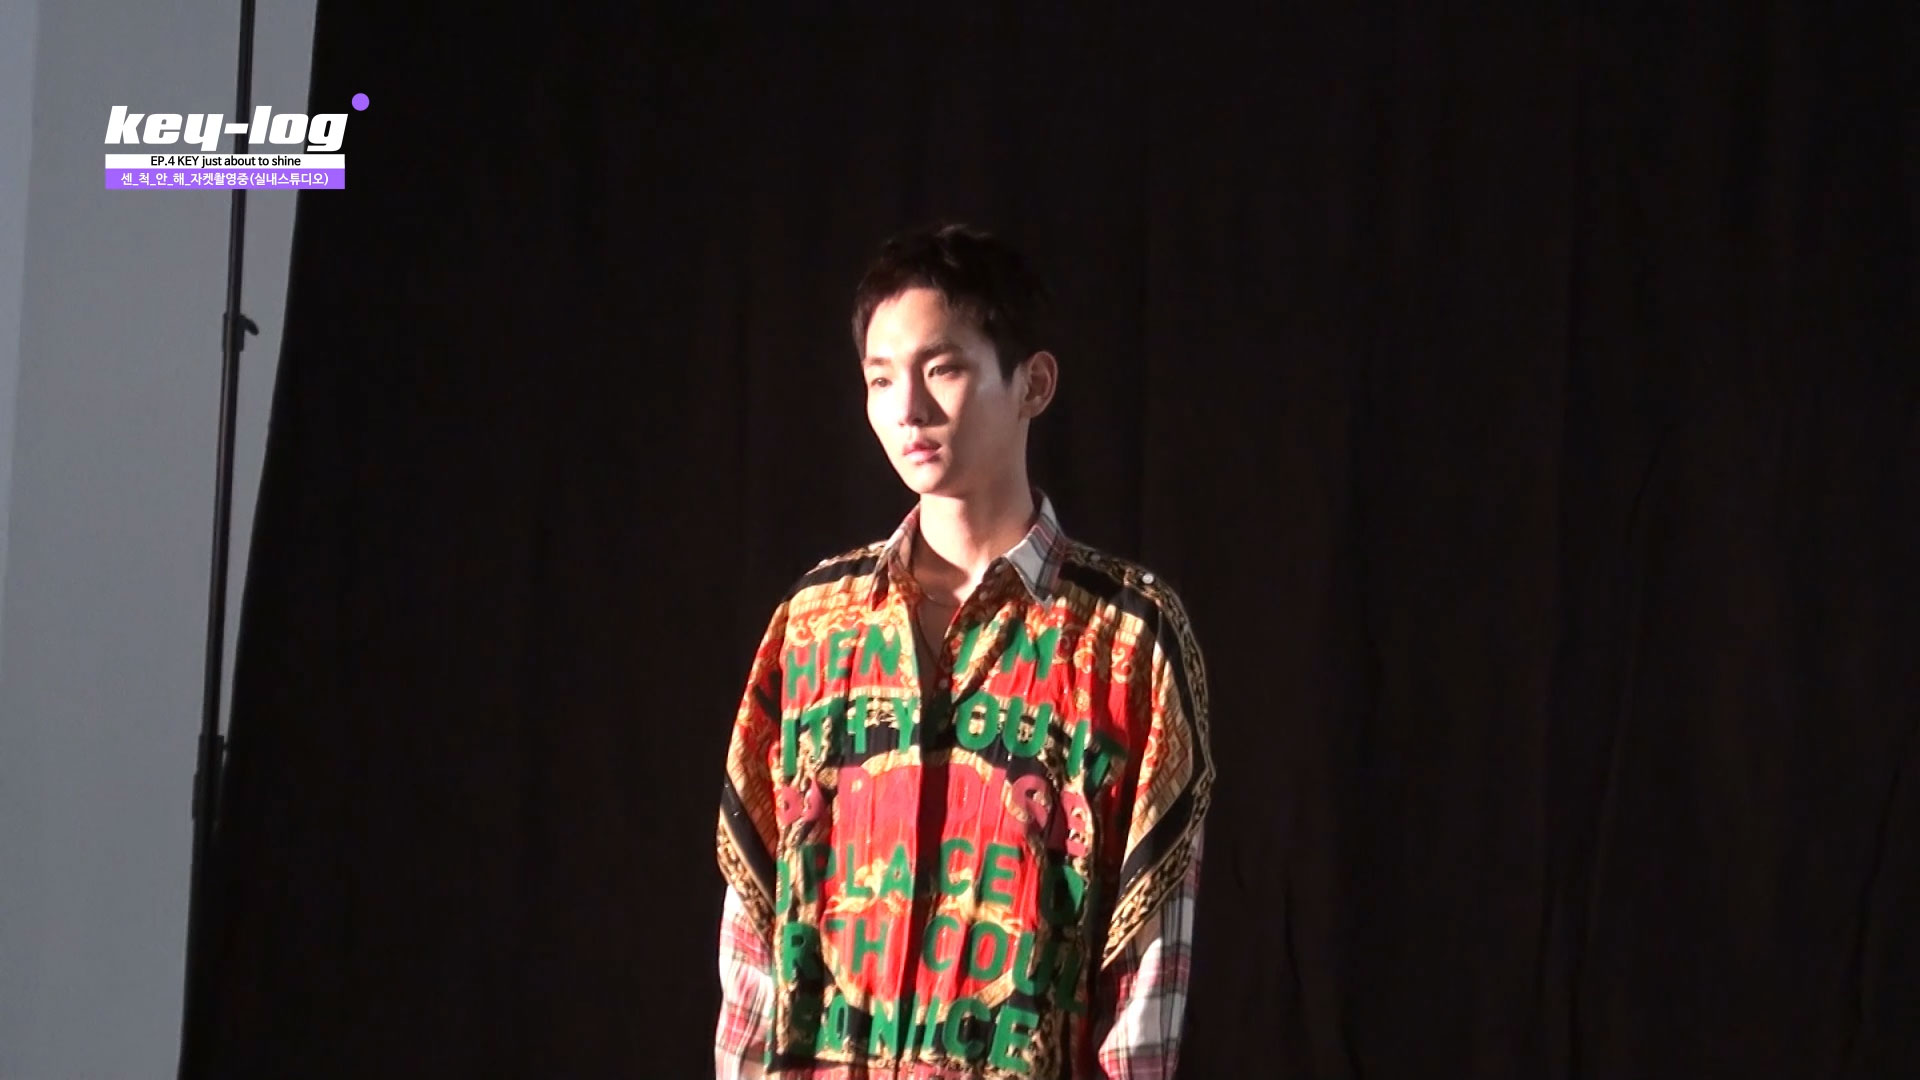 Key-log 〈 EP4. KEY just about to shine 〉